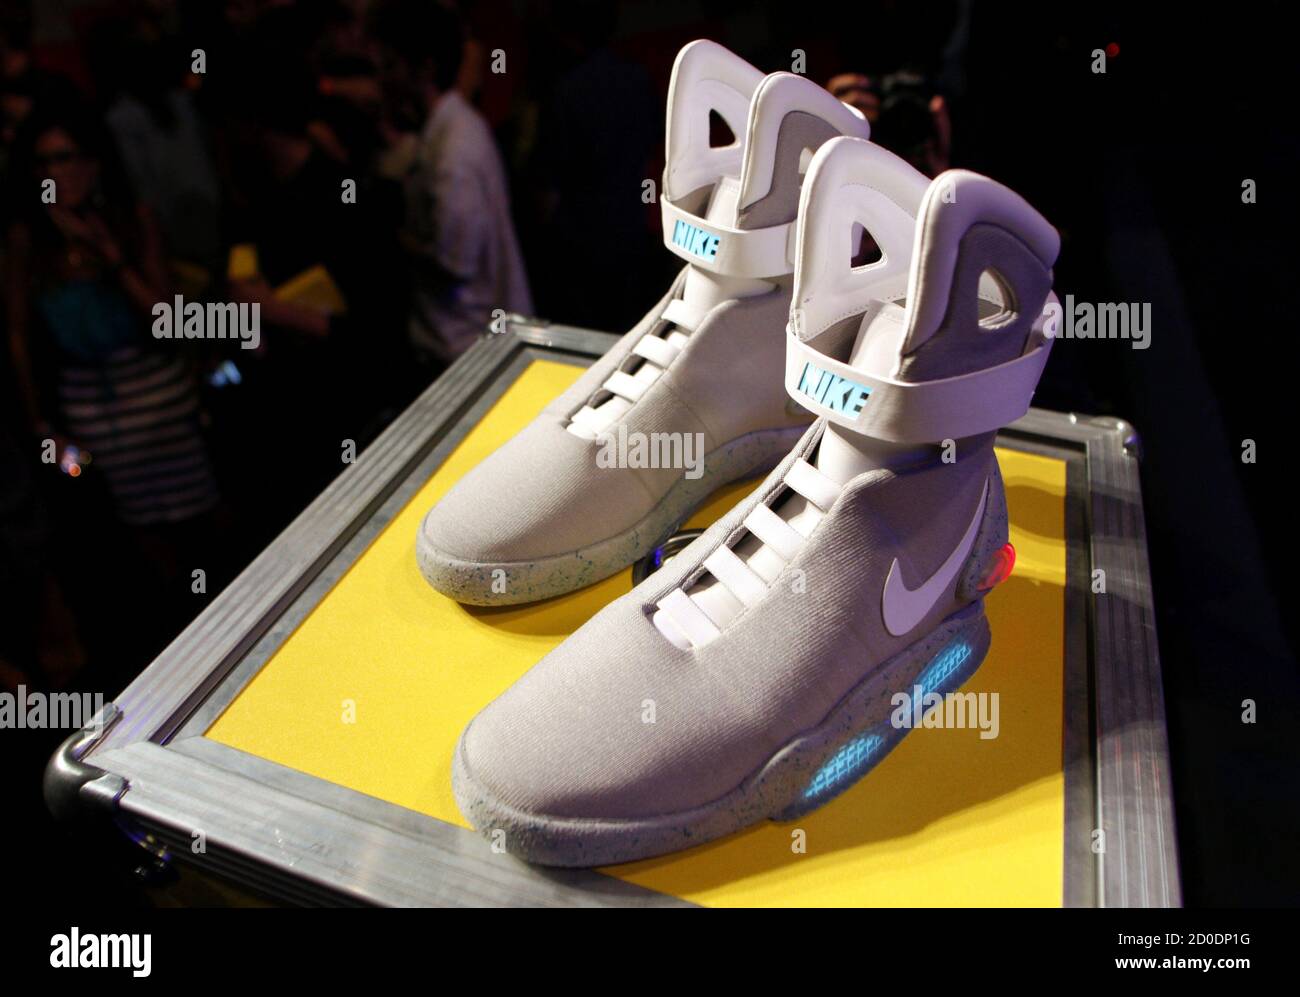 A pair of 2011 NIKE MAG shoes, based on the original NIKE MAG worn in 2015  by the "Back to the Future" character Marty McFly, played by Michael J.  Fox, is displayed